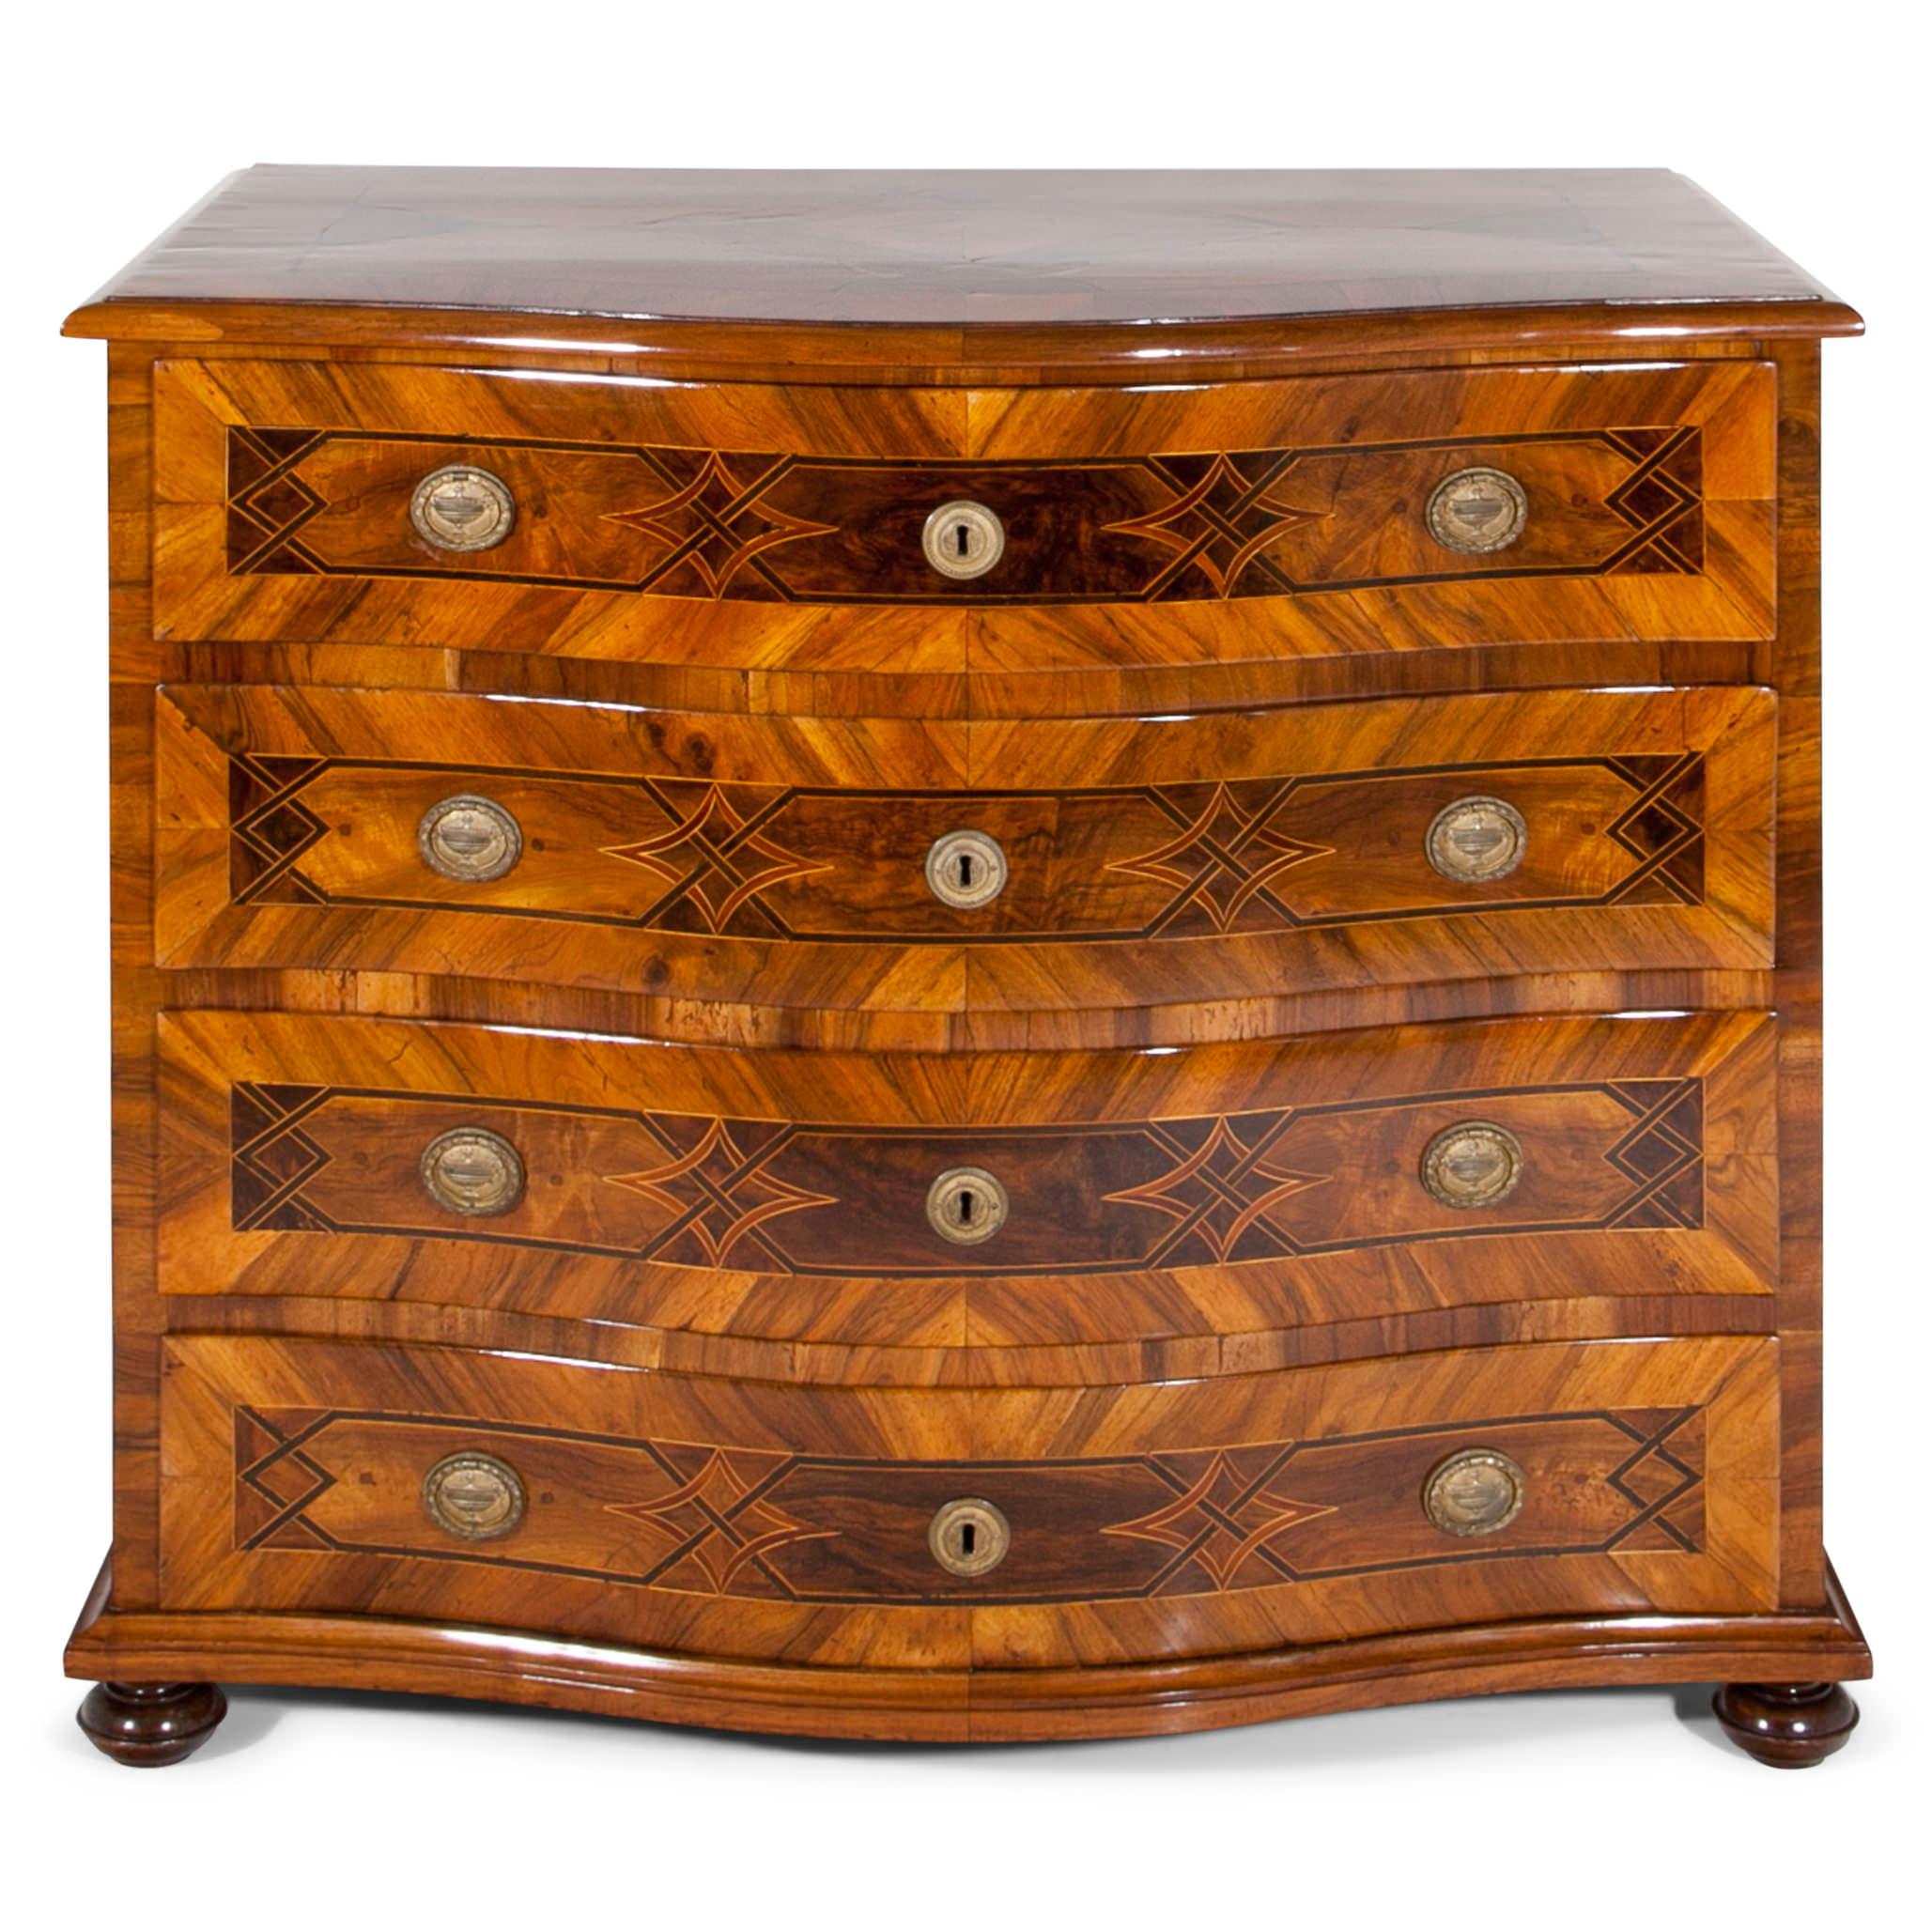 Four-drawered Baroque chest of drawers, standing on bun feet. The body shows a bellied front and beautiful strap work Marquetry on the drawers.